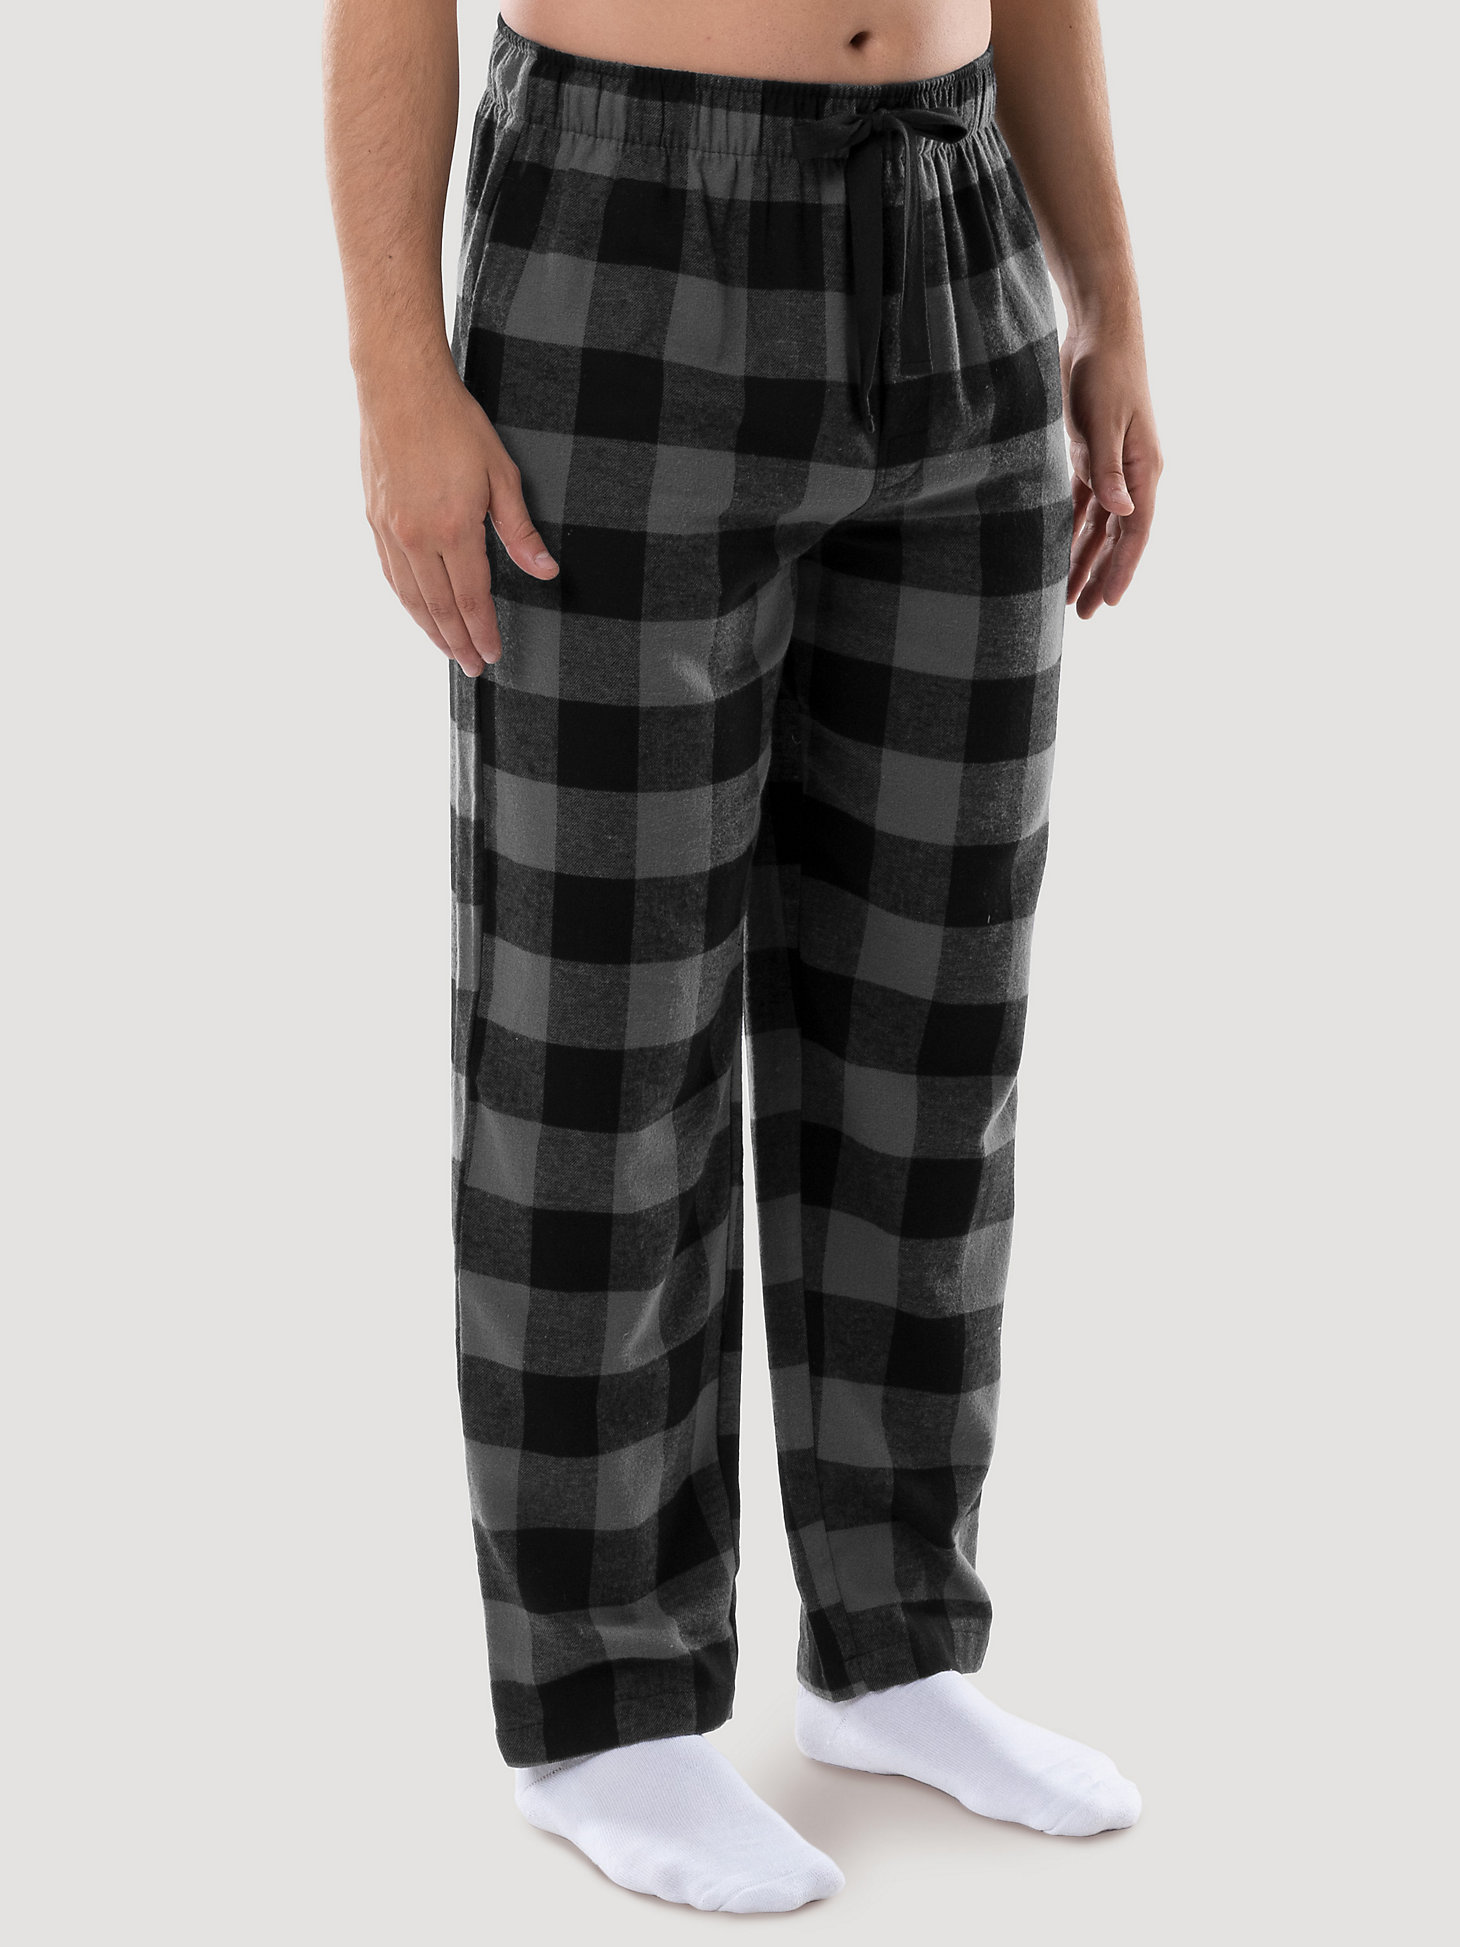 Men's Flannel Buffalo Plaid Pajama Pant in Charcoal alternative view 1